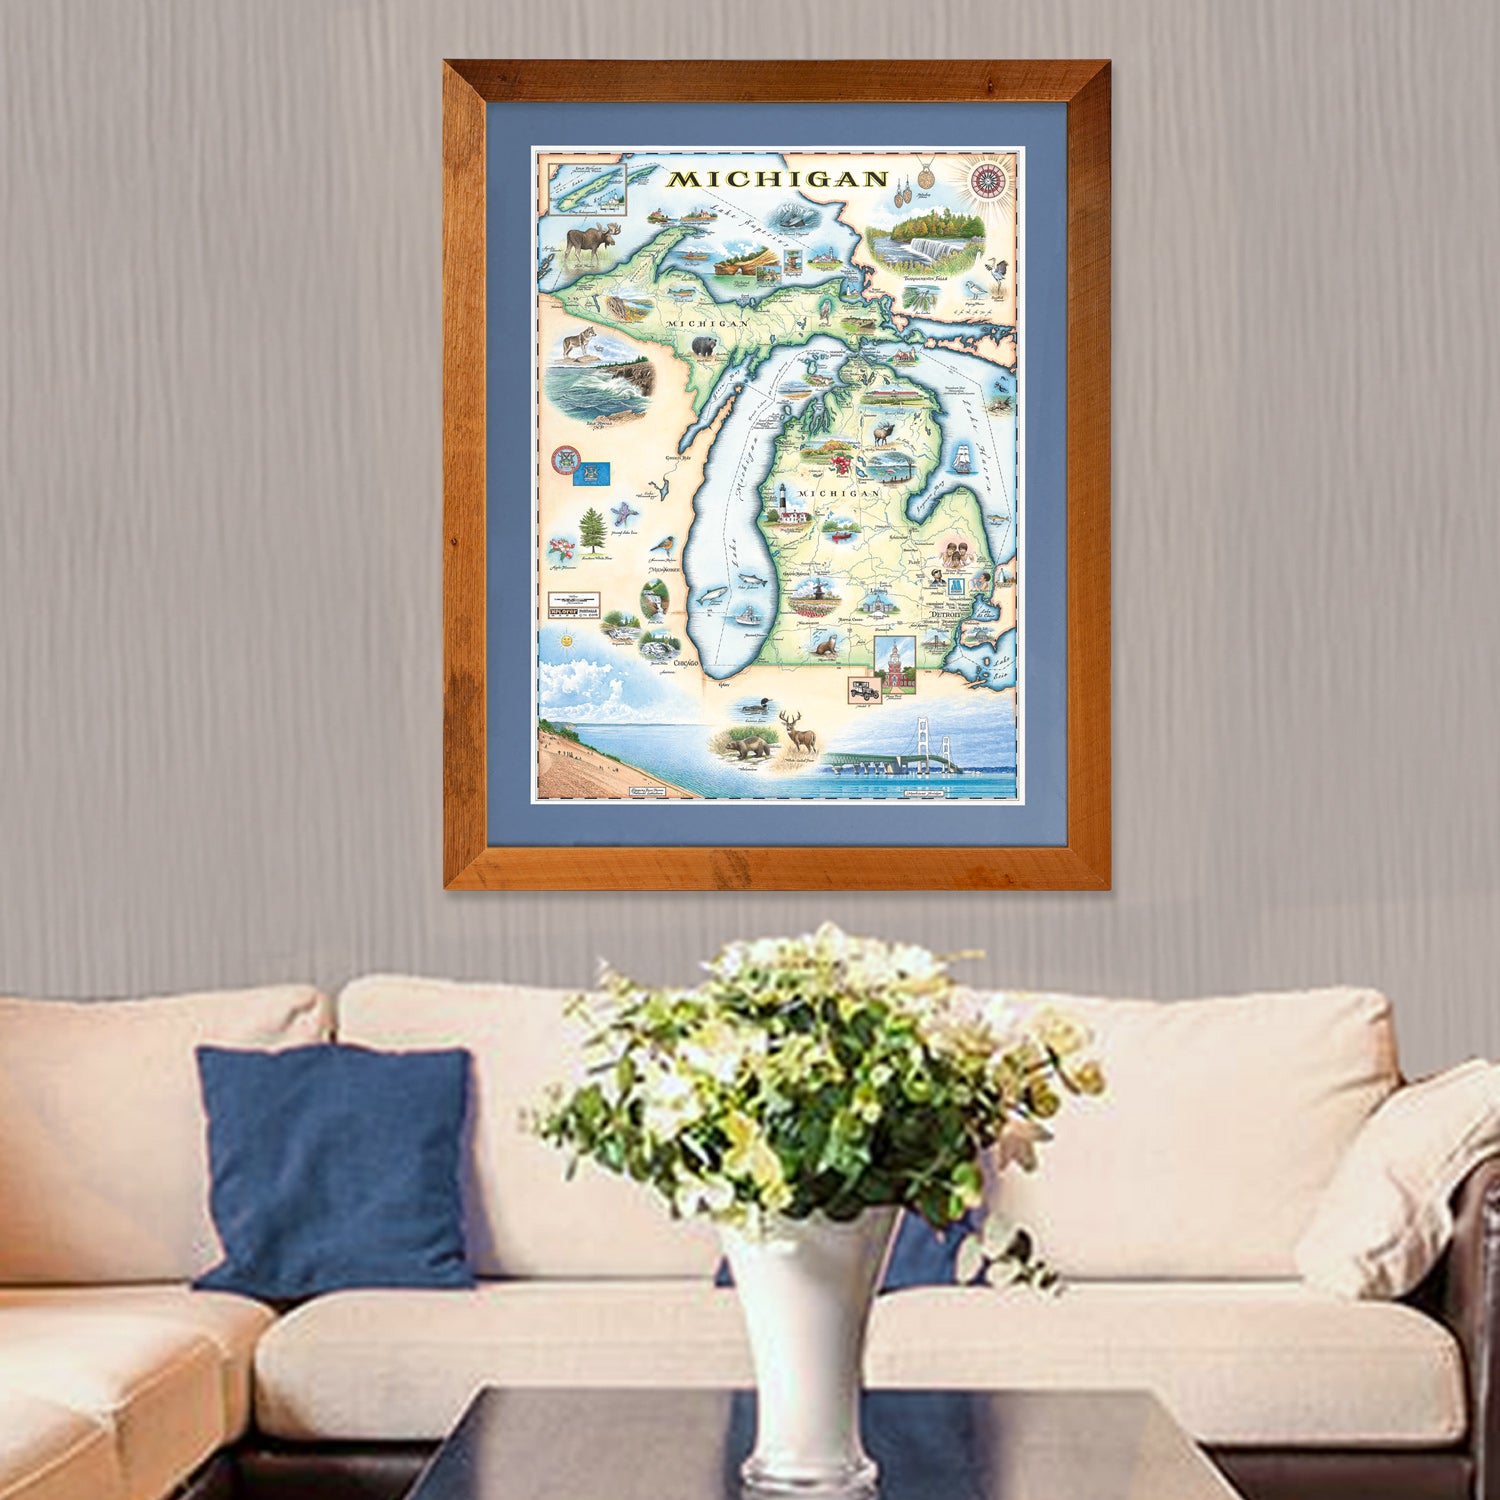 Xplorer Maps hand-drawn map of the state of Michigan hangs above a couch. The print is framed with a brown wooden frame.